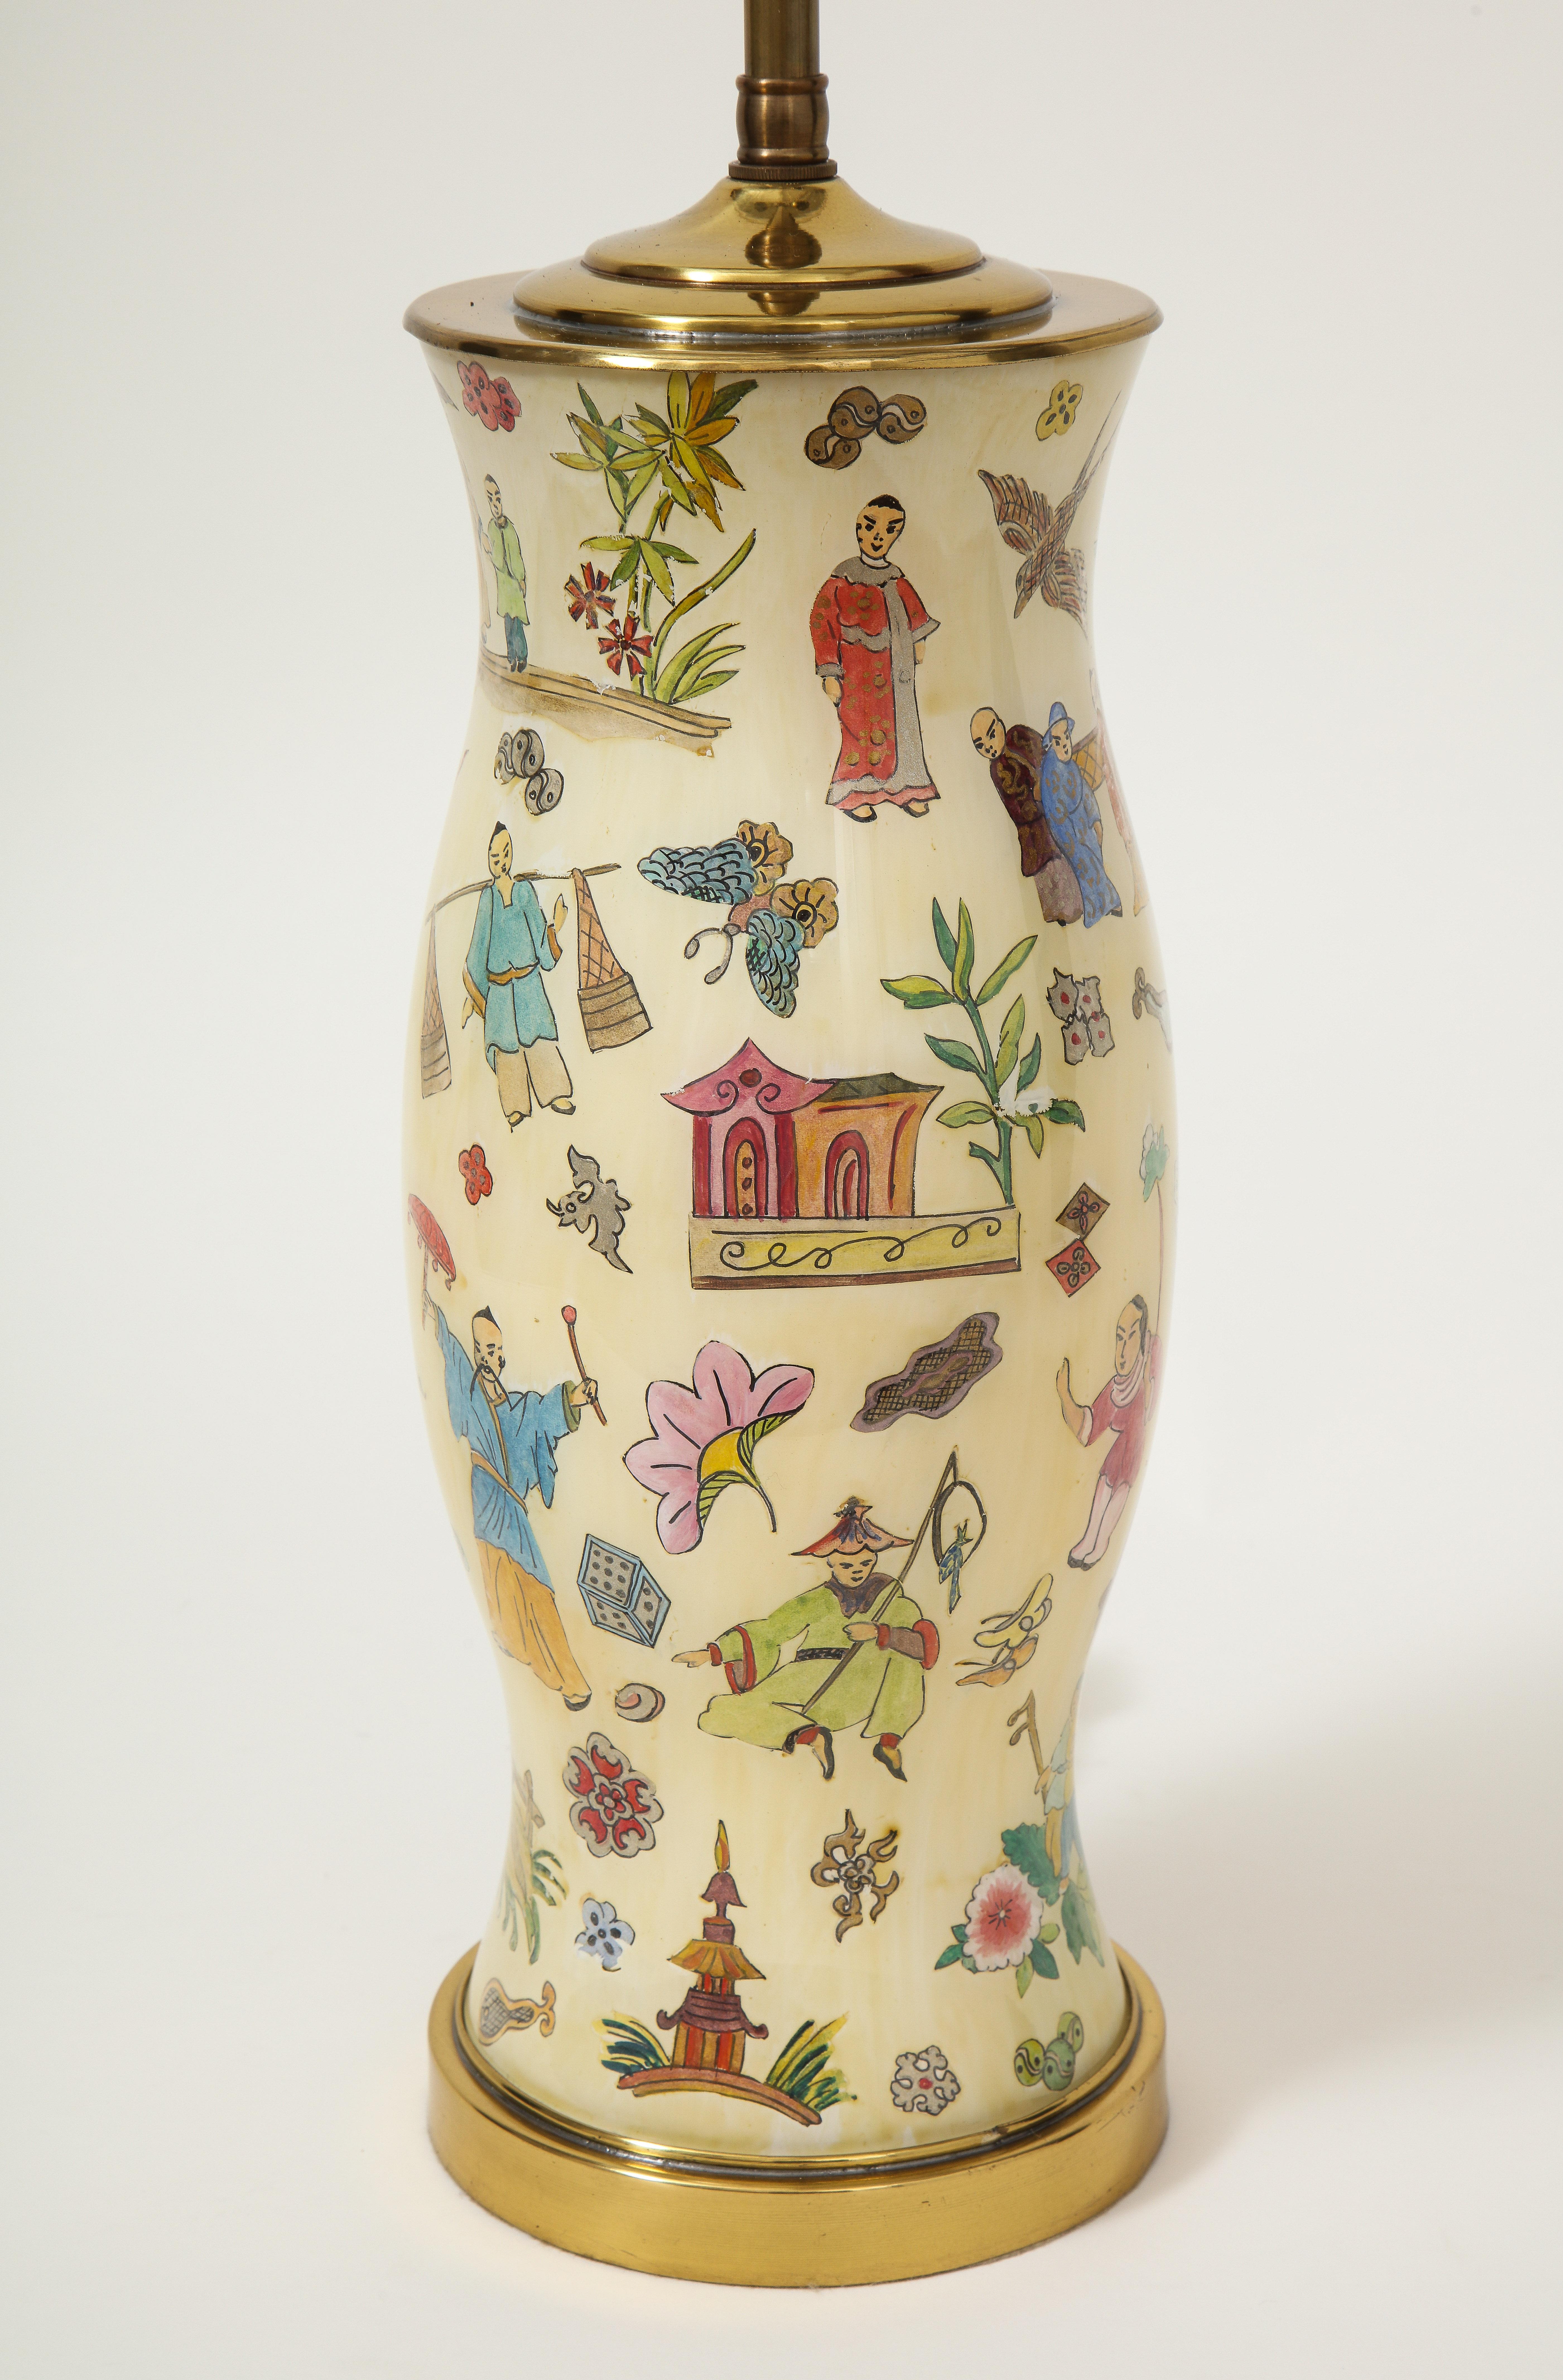 Reverse painted glass baluster-shaped vase decorated with various chinoiserie motifs including Mandarin figures, pagodas, lotus blossoms, yin yang emblems, and more on a cream ground; mounted on a turned giltwood base and fitted an adjustable brass